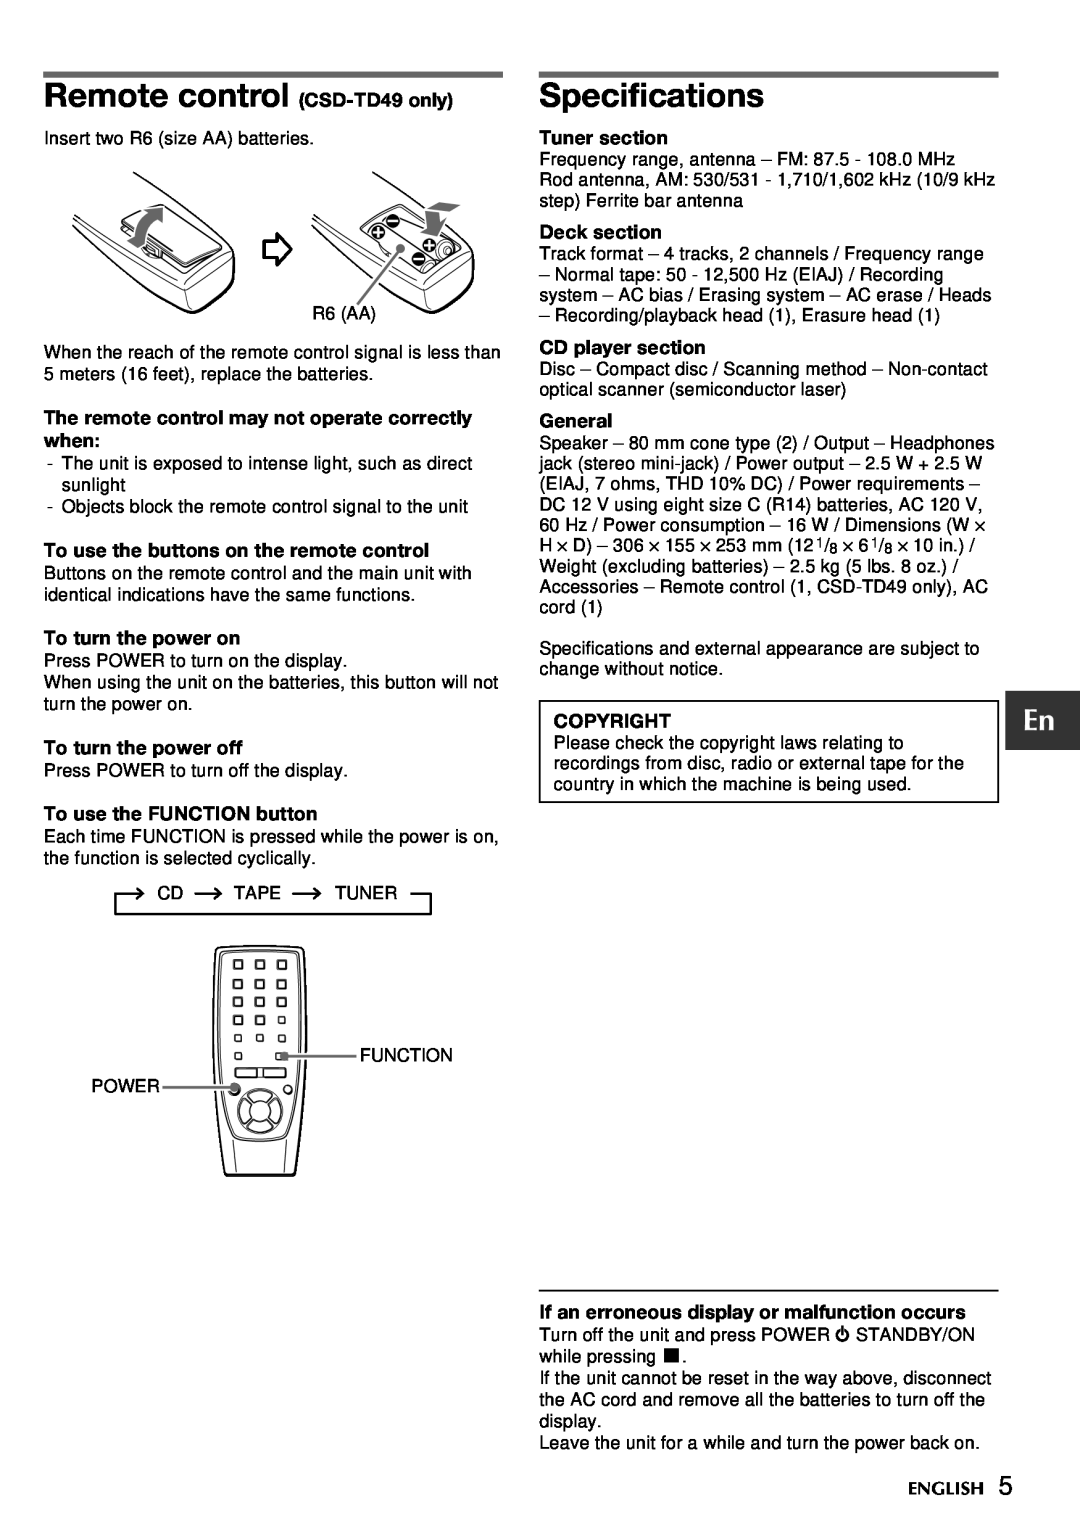 Aiwa CSD-TD39 Remote control CSD-TD49only, Specifications, The remote control may not operate correctly when, Deck section 